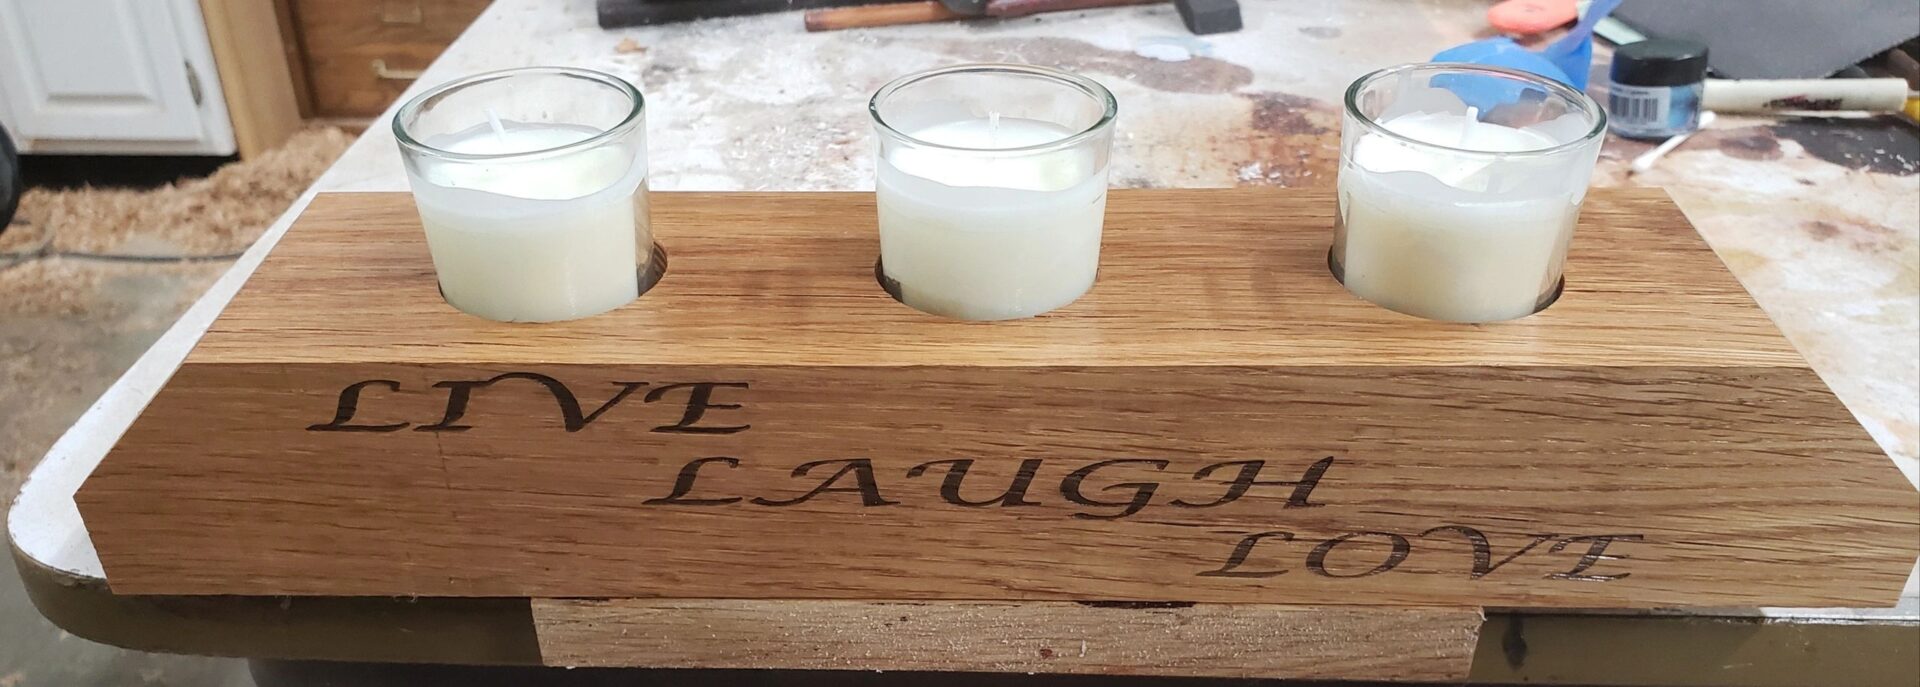 wooden candle holder with live, laugh, and love print